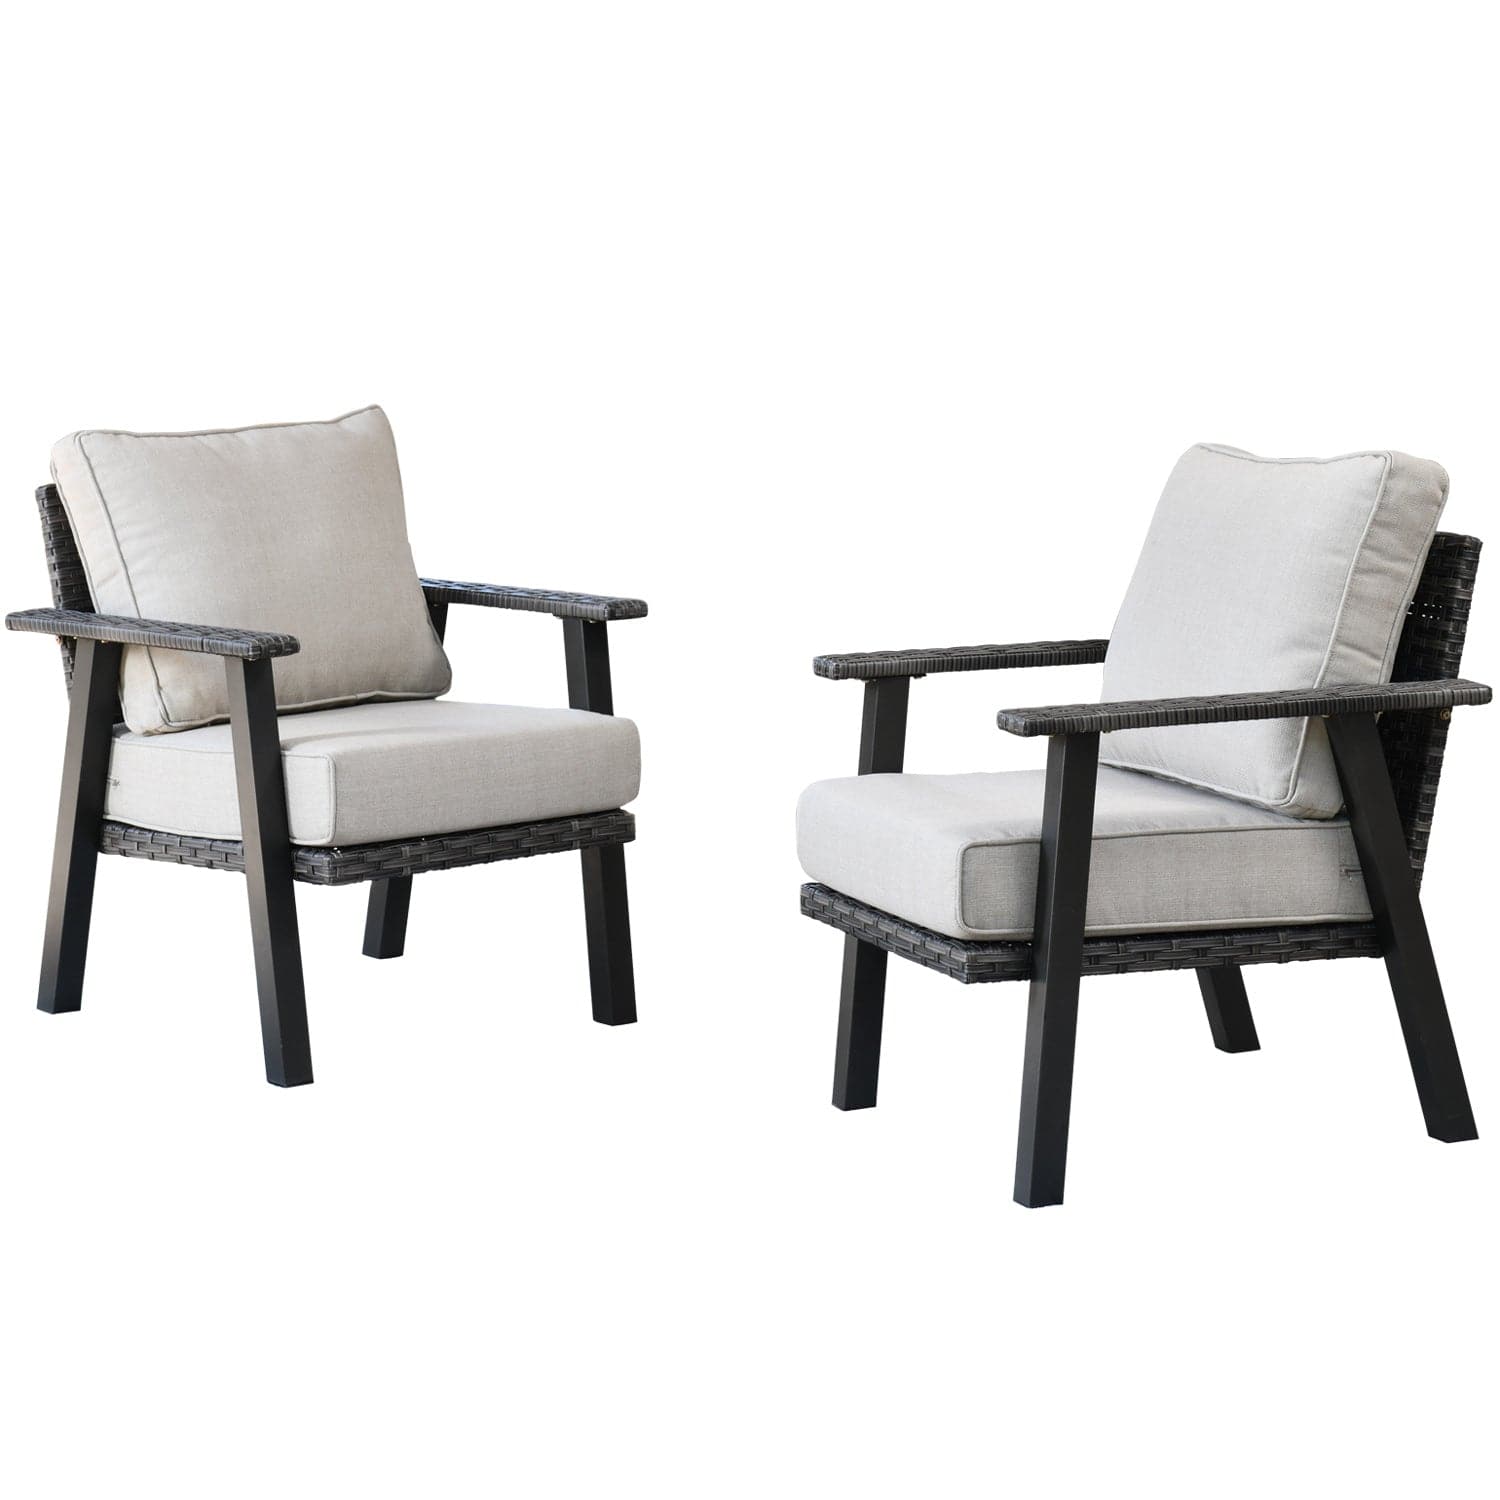 Ovios Patio Bistro 2-Piece Set Outdoor Chairs with 5''Cushion, Olefin Fabric